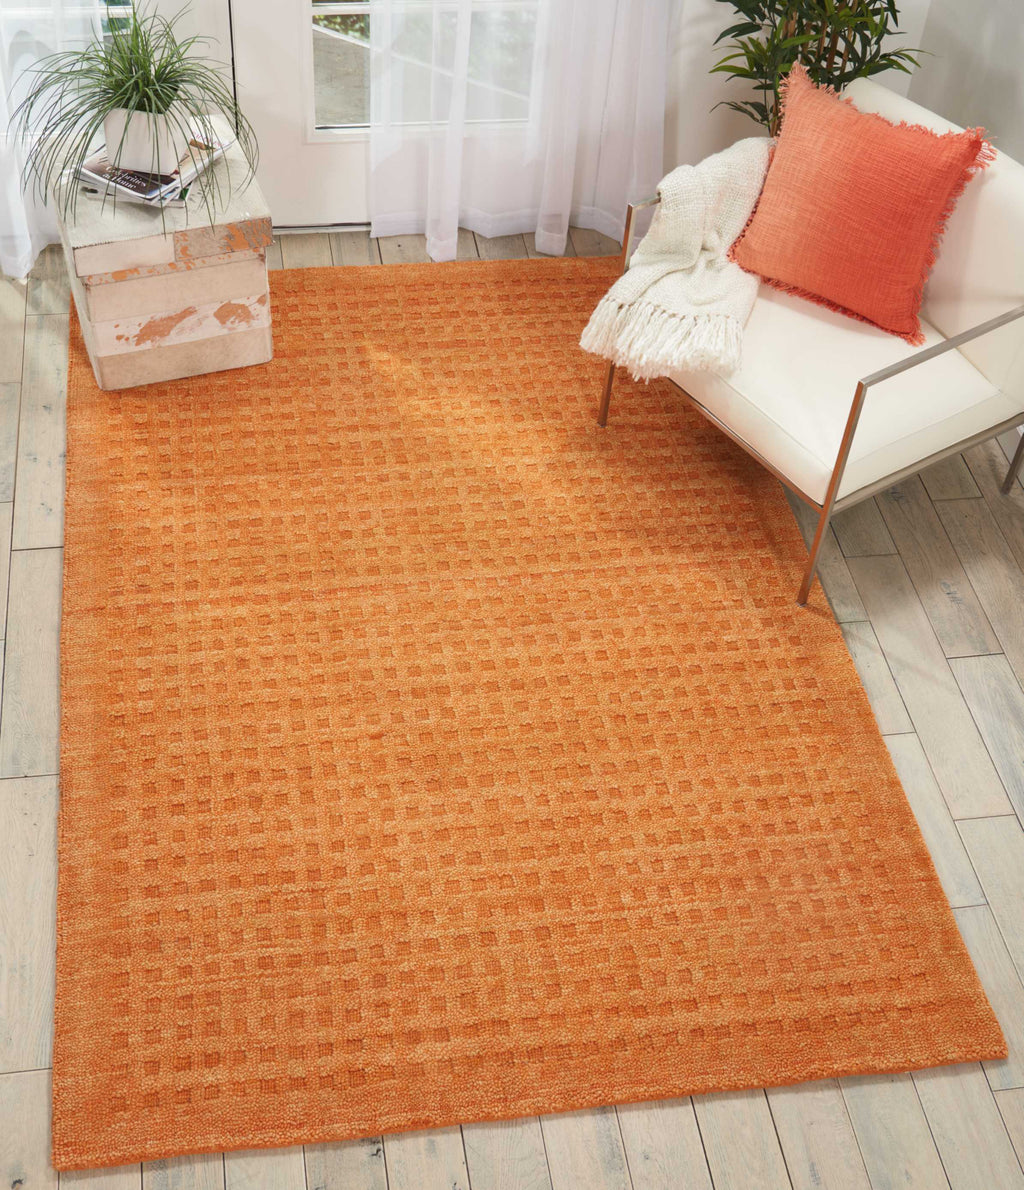 Nourison Perris PERR1 Sunset Area Rug Room Image Feature